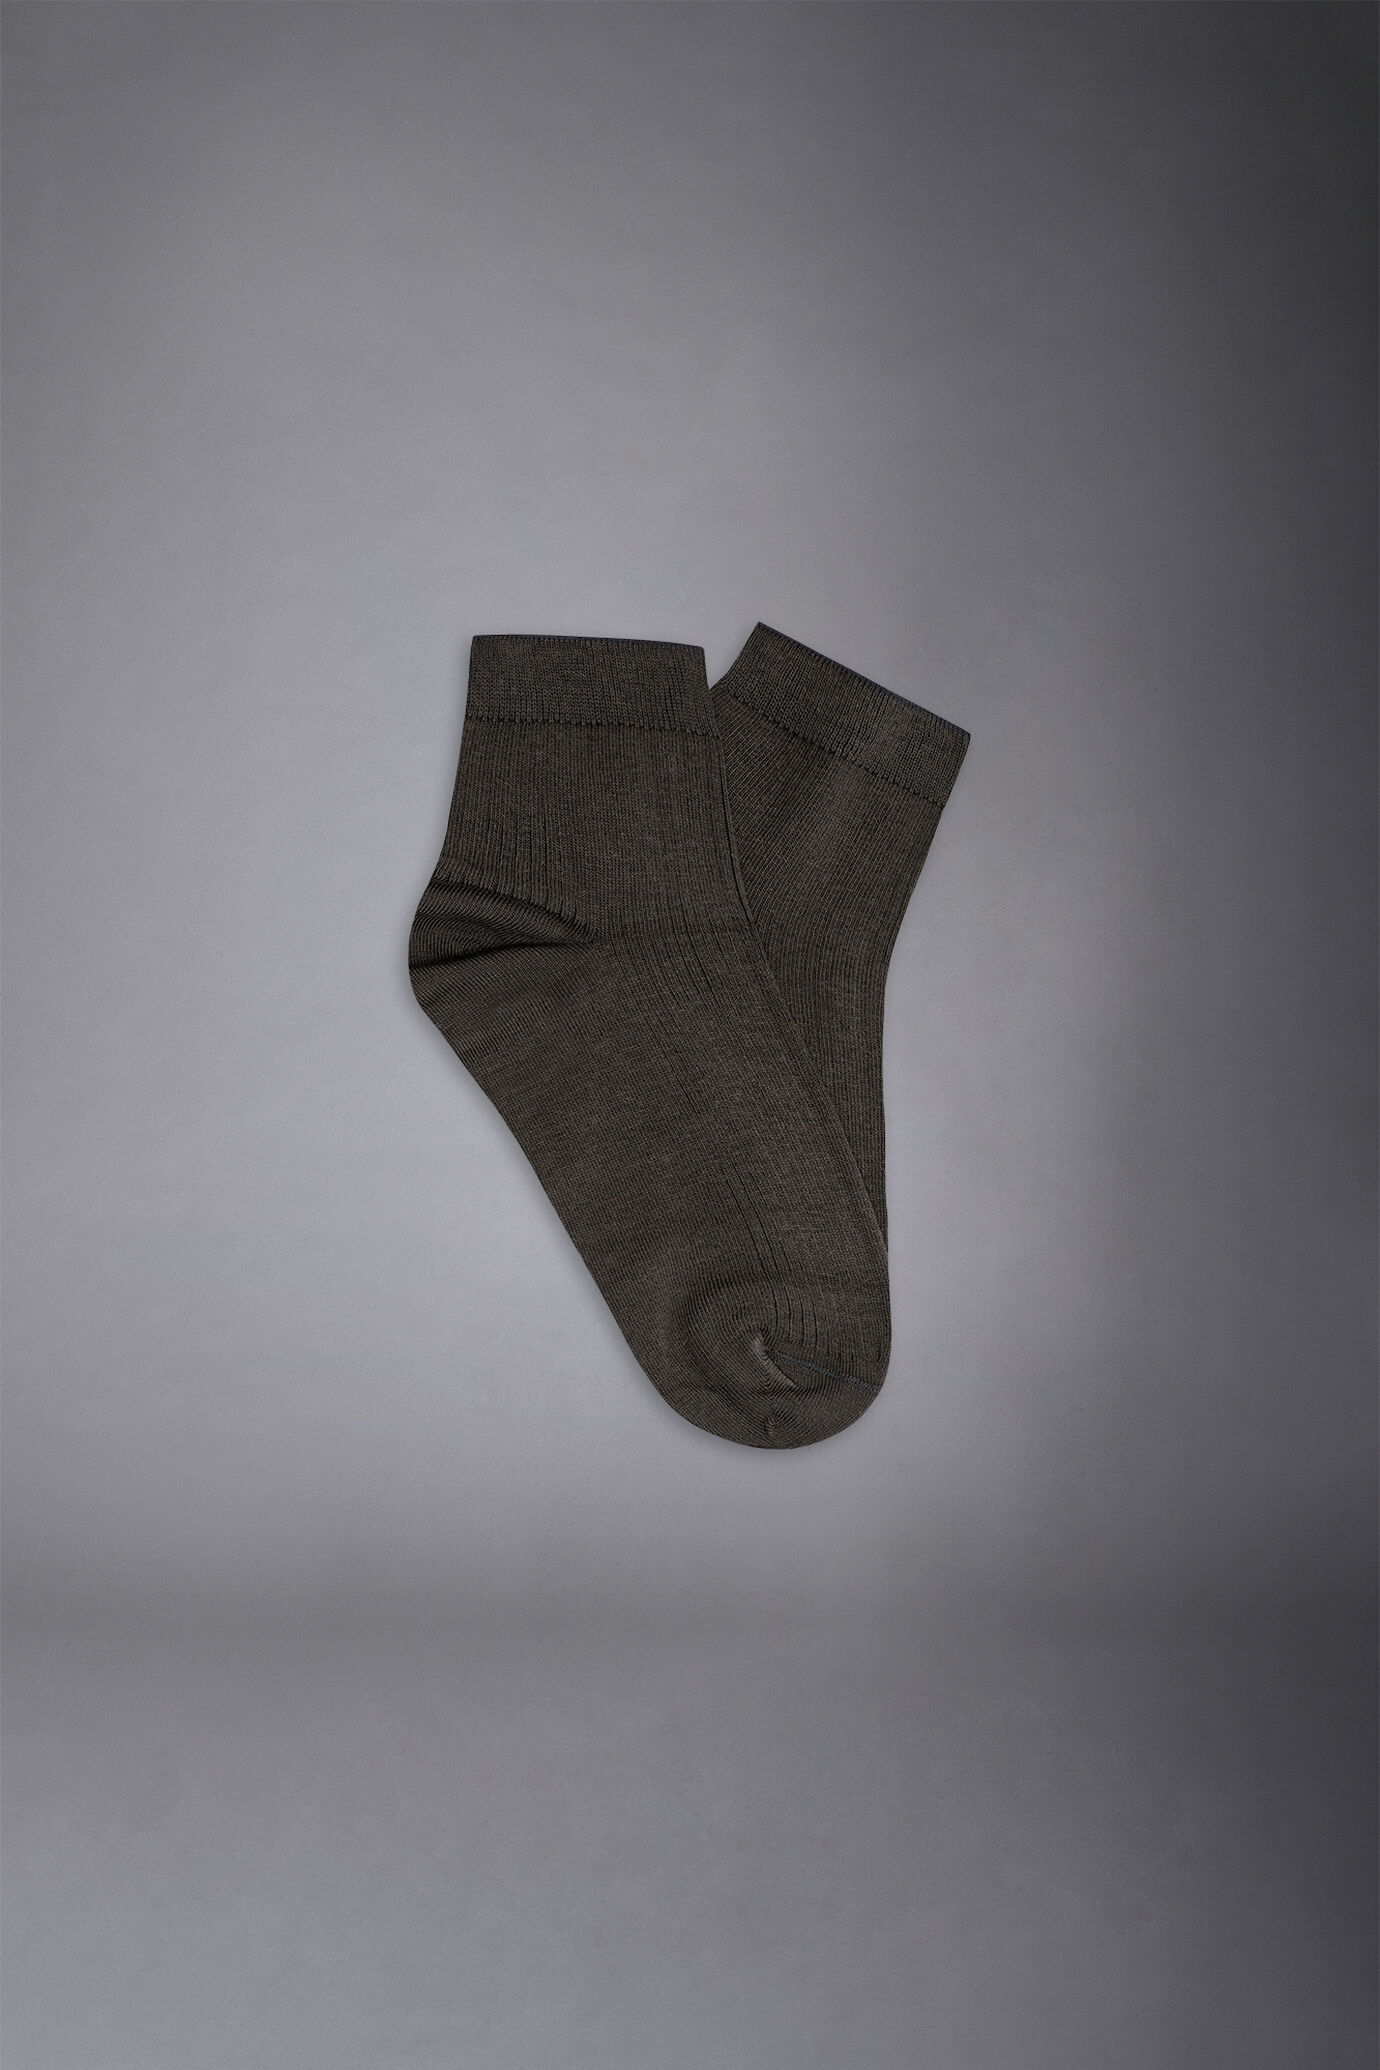 Women’s socks made in Italy in cotton blend solid color ribbed